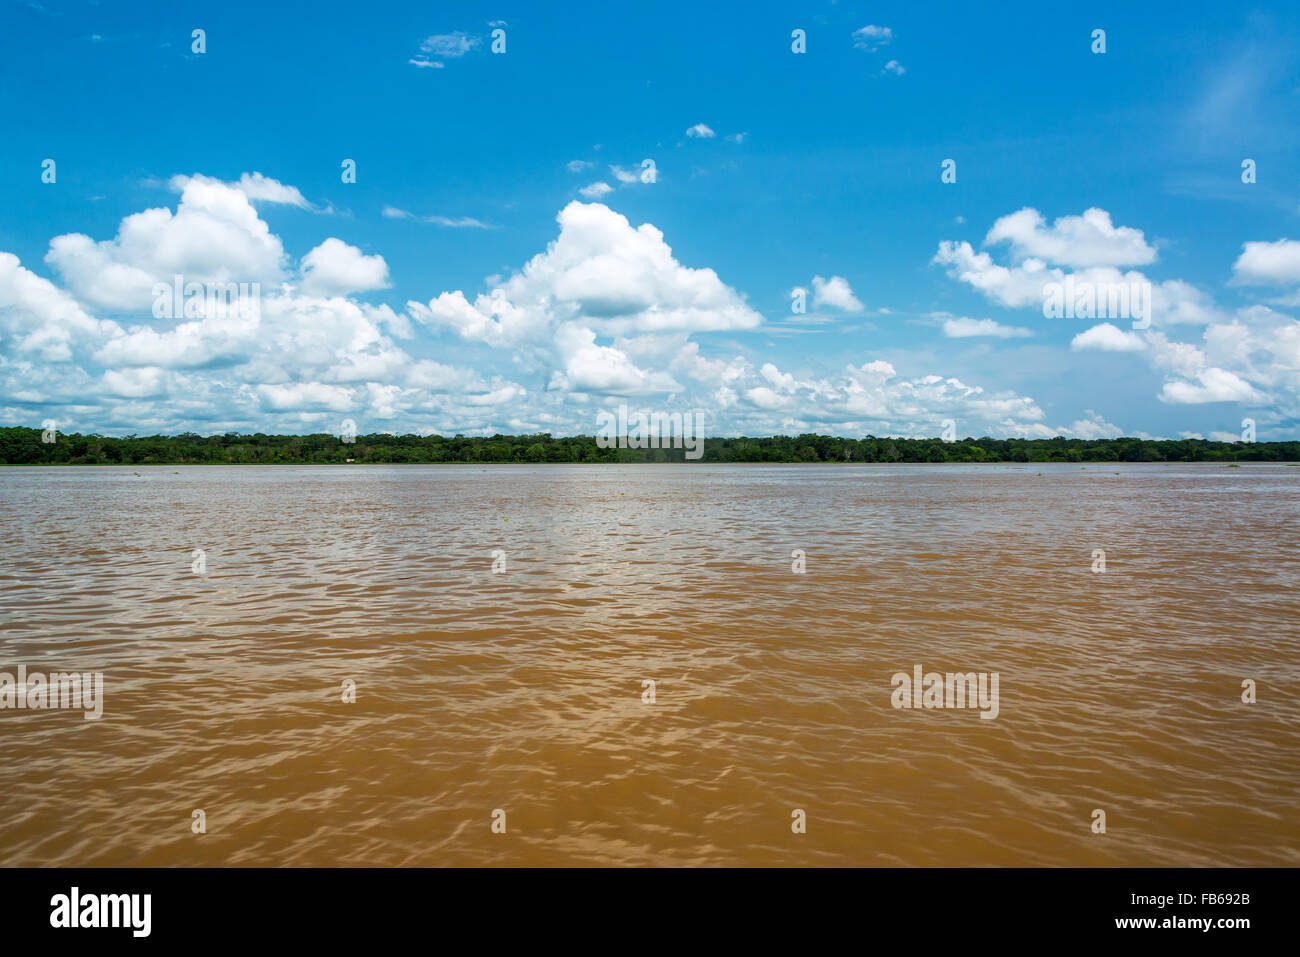 View of the brown dirty water of the Amazon River near Leticia, Colombia Stock Photo